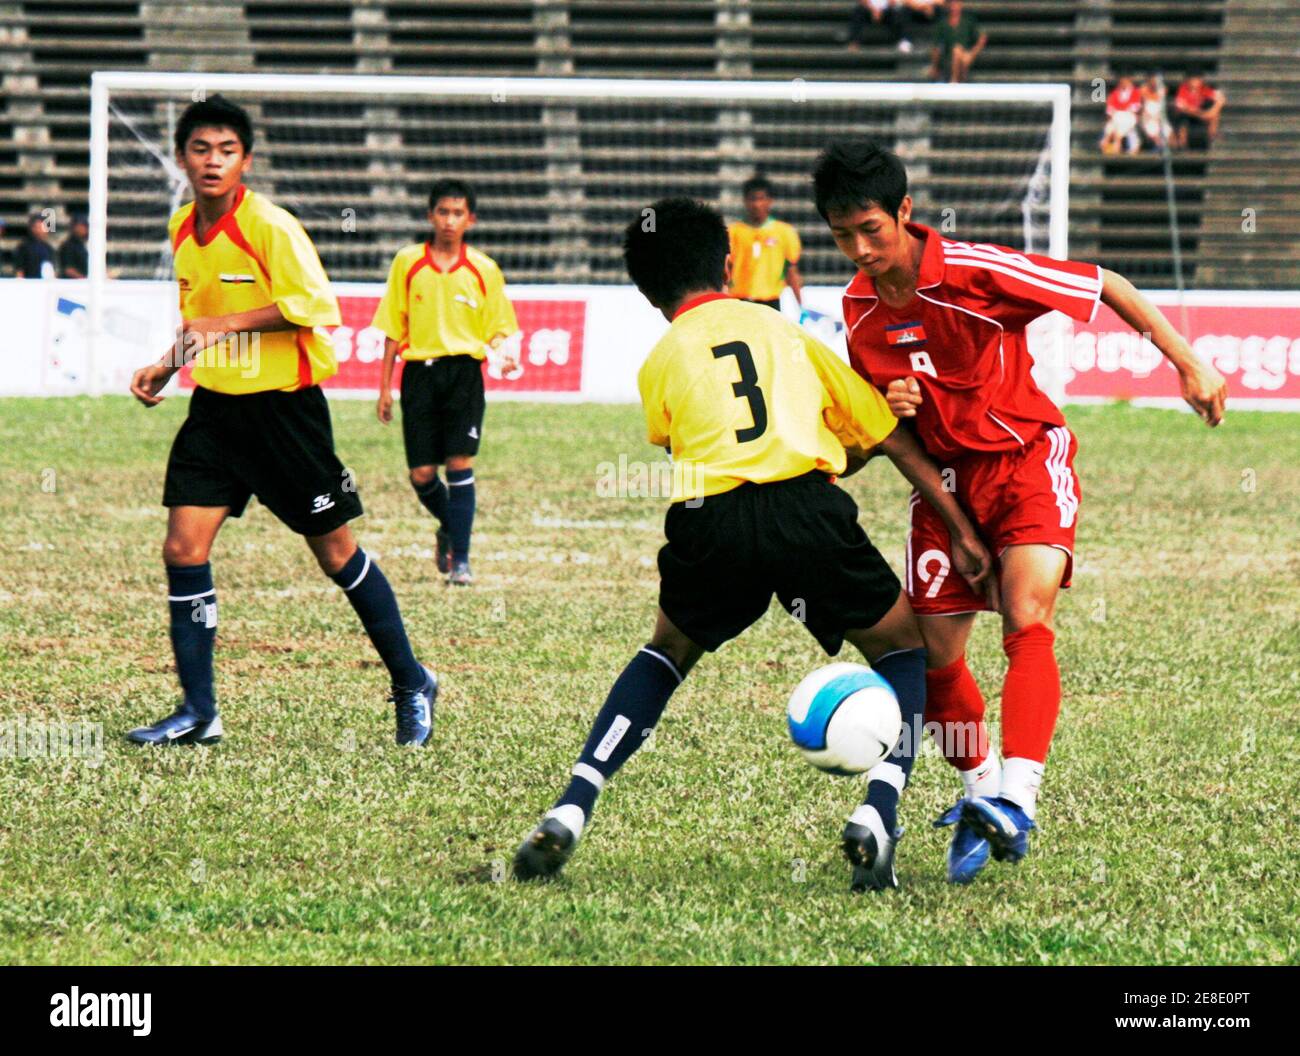 Ek Vanak of Cambodia (R) challenges for the ball with Mohammad Rackin Ramli of Brunei during their Asean Football Federation (AFF) U17 Youth Championship 2007 soccer match at Olympic National stadium in Phnom Penh August 25, 2007.    REUTERS/Chor Sokunthea (CAMBODIA) Stock Photo